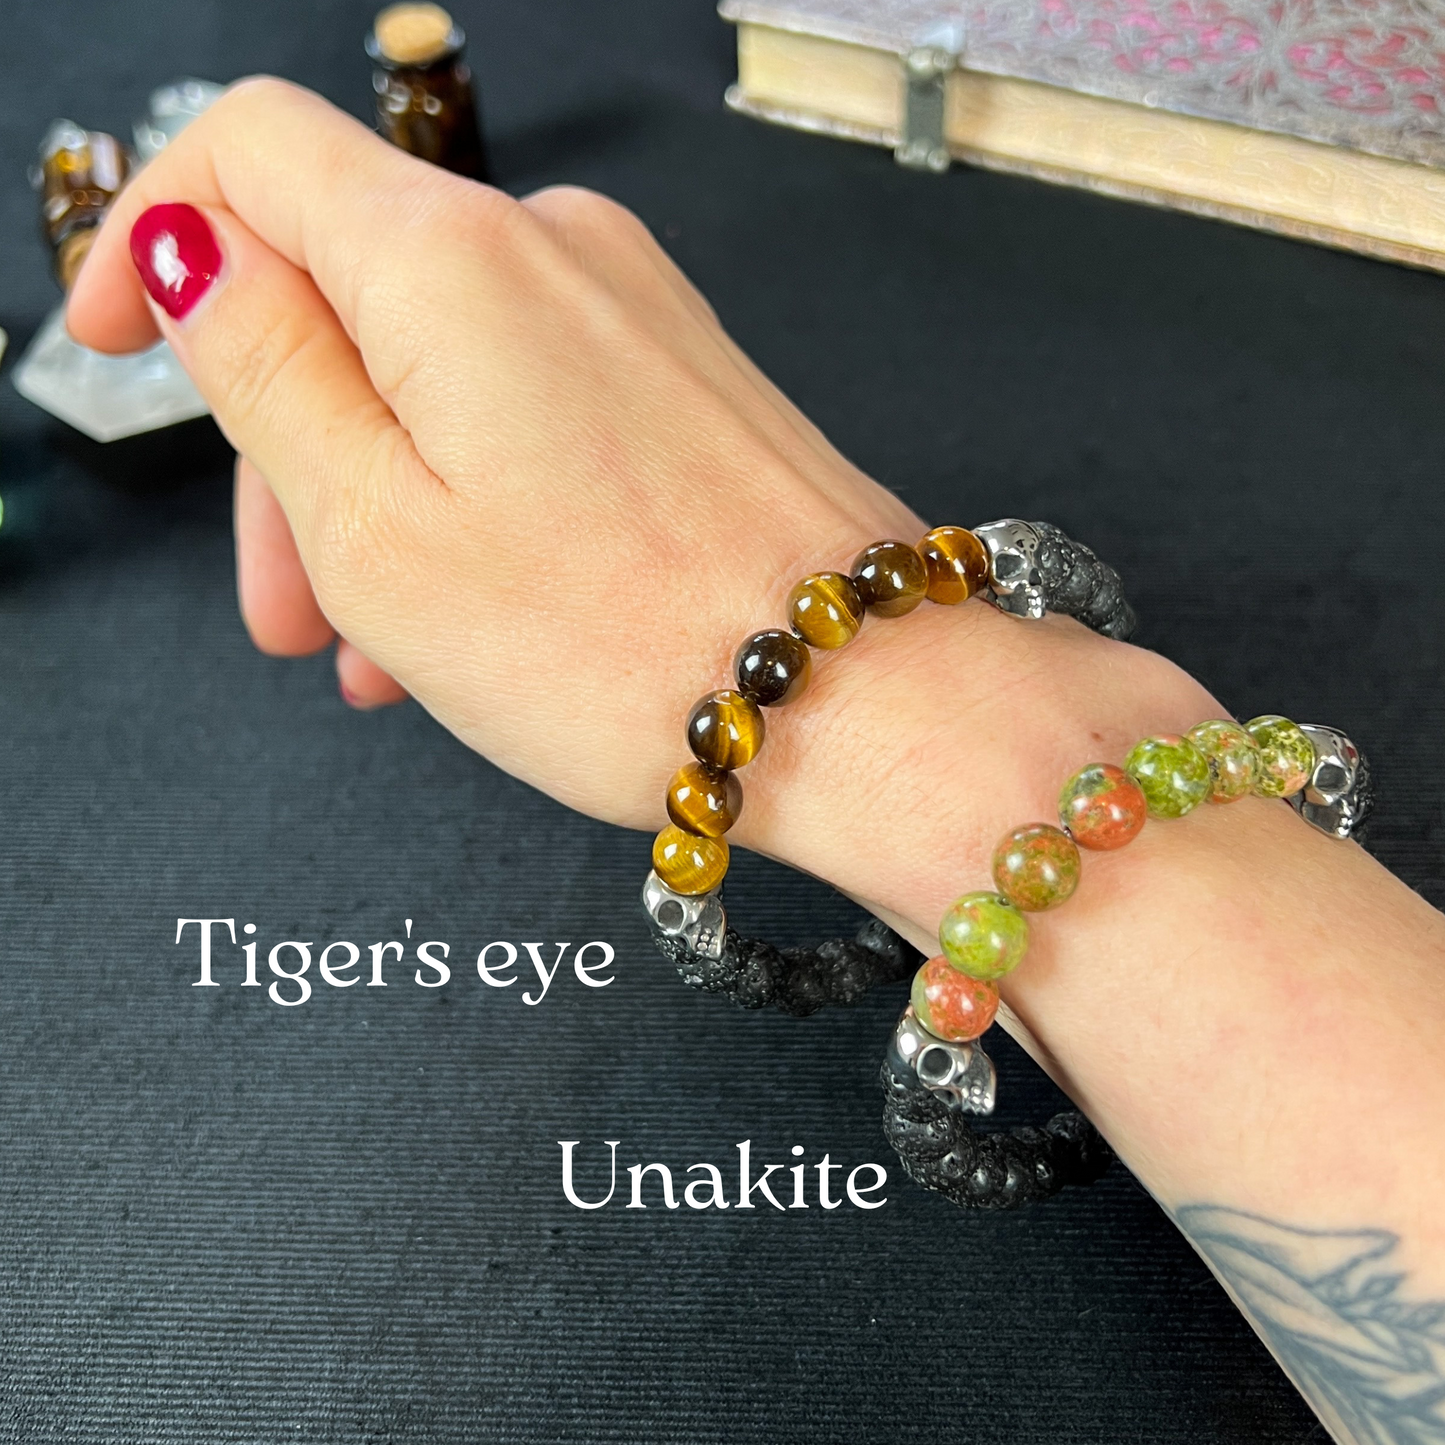 Lava rock and unakite or tiger's eye mala bracelet, with stainless steel skulls